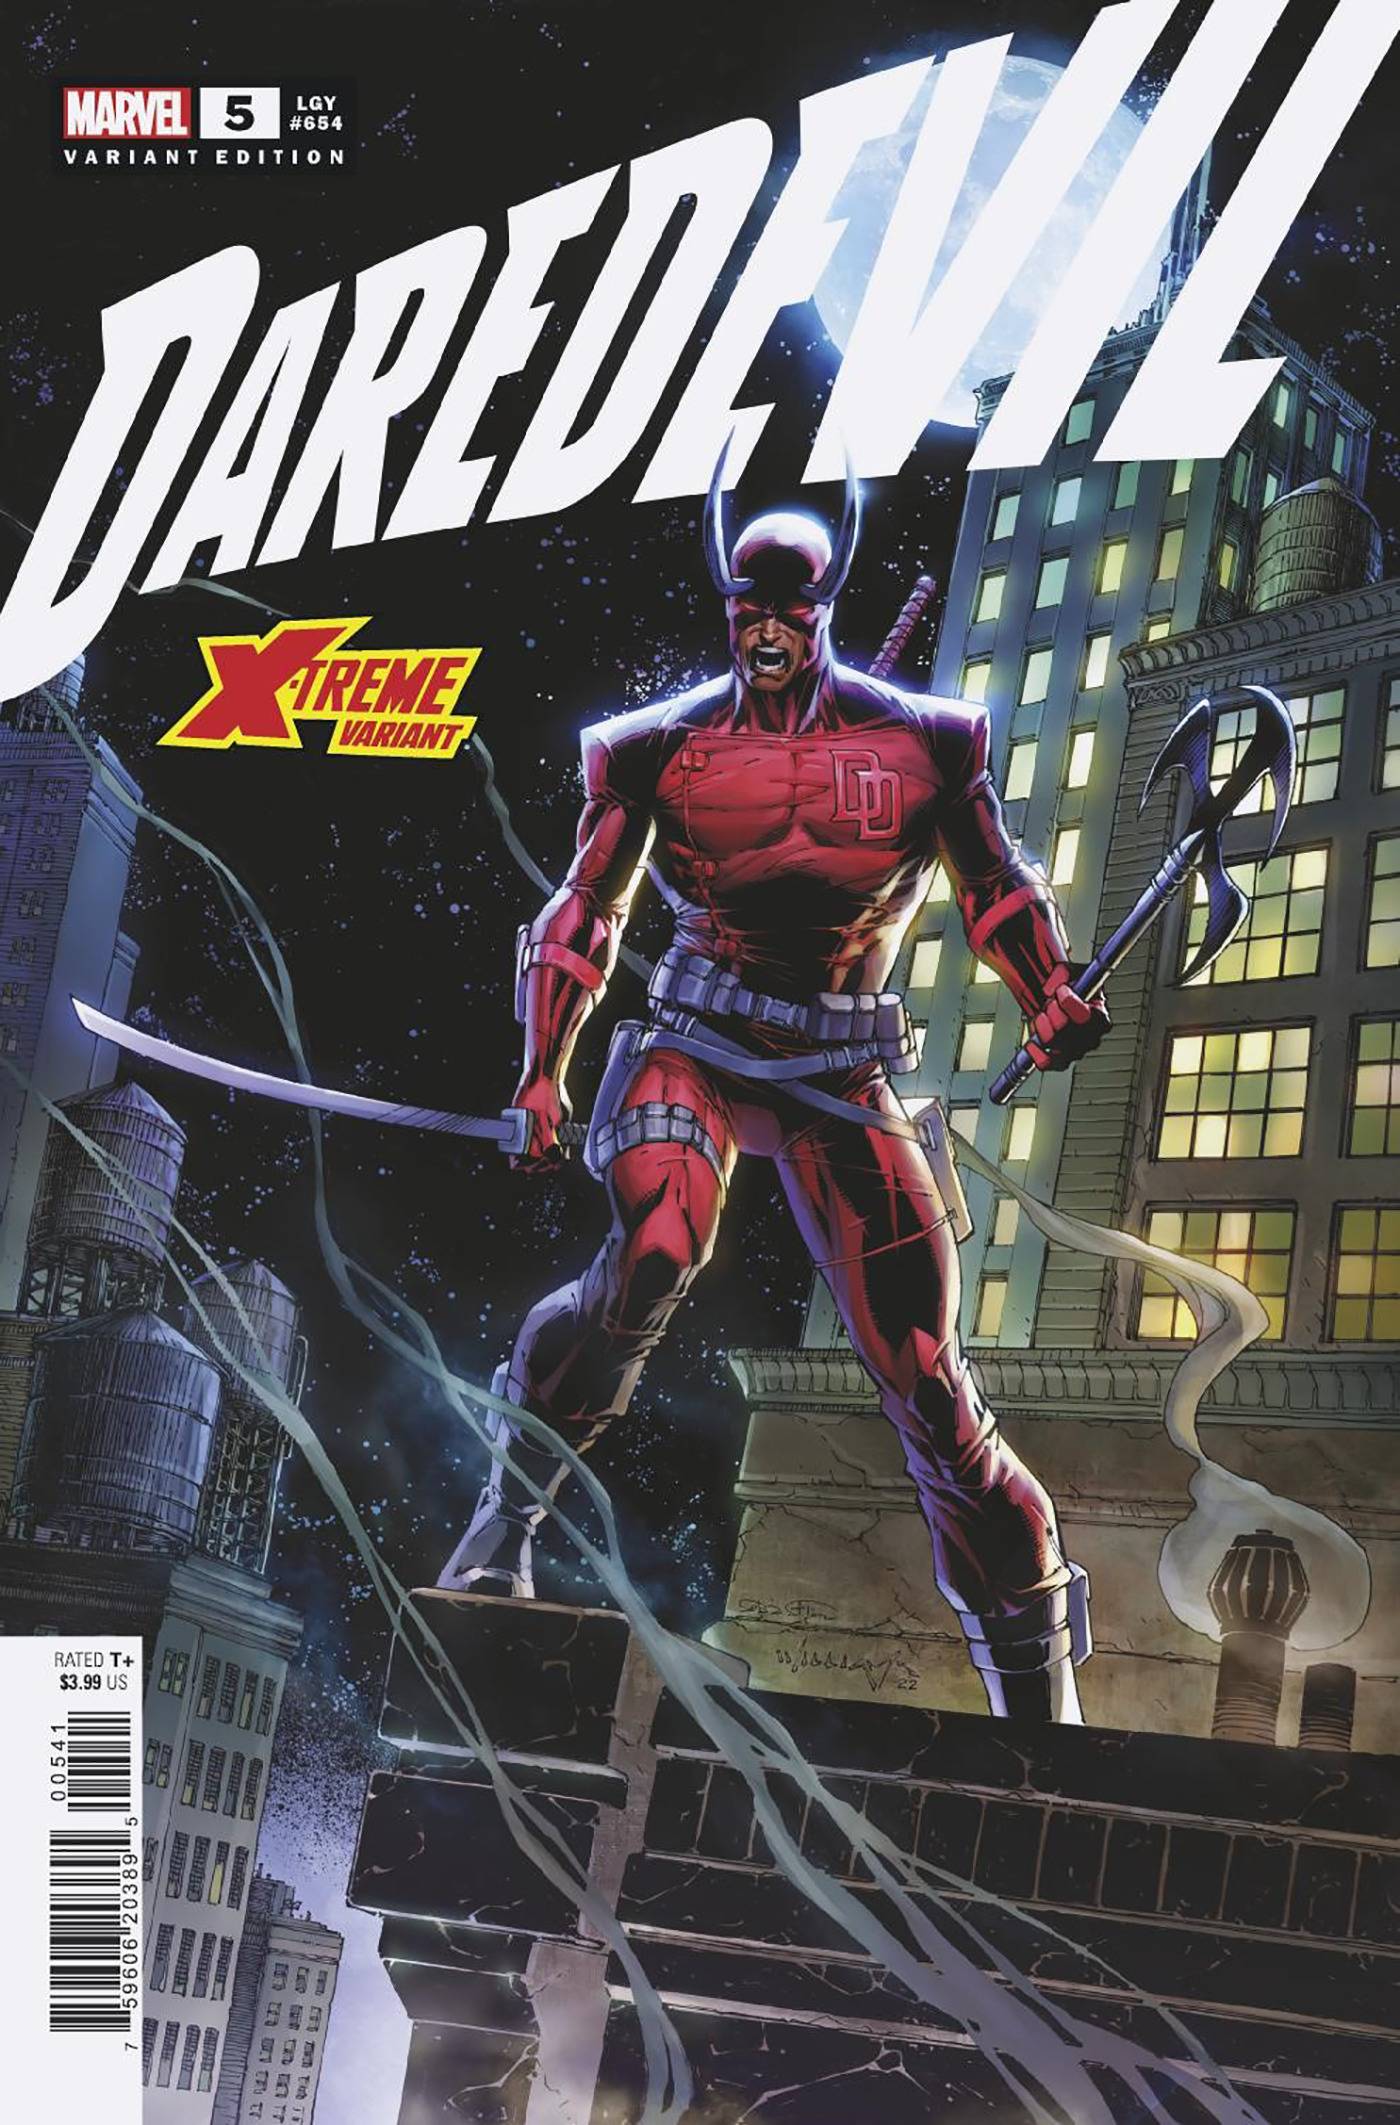 Daredevil #5 (LGY #654) / Williams Extreme Variant Cover